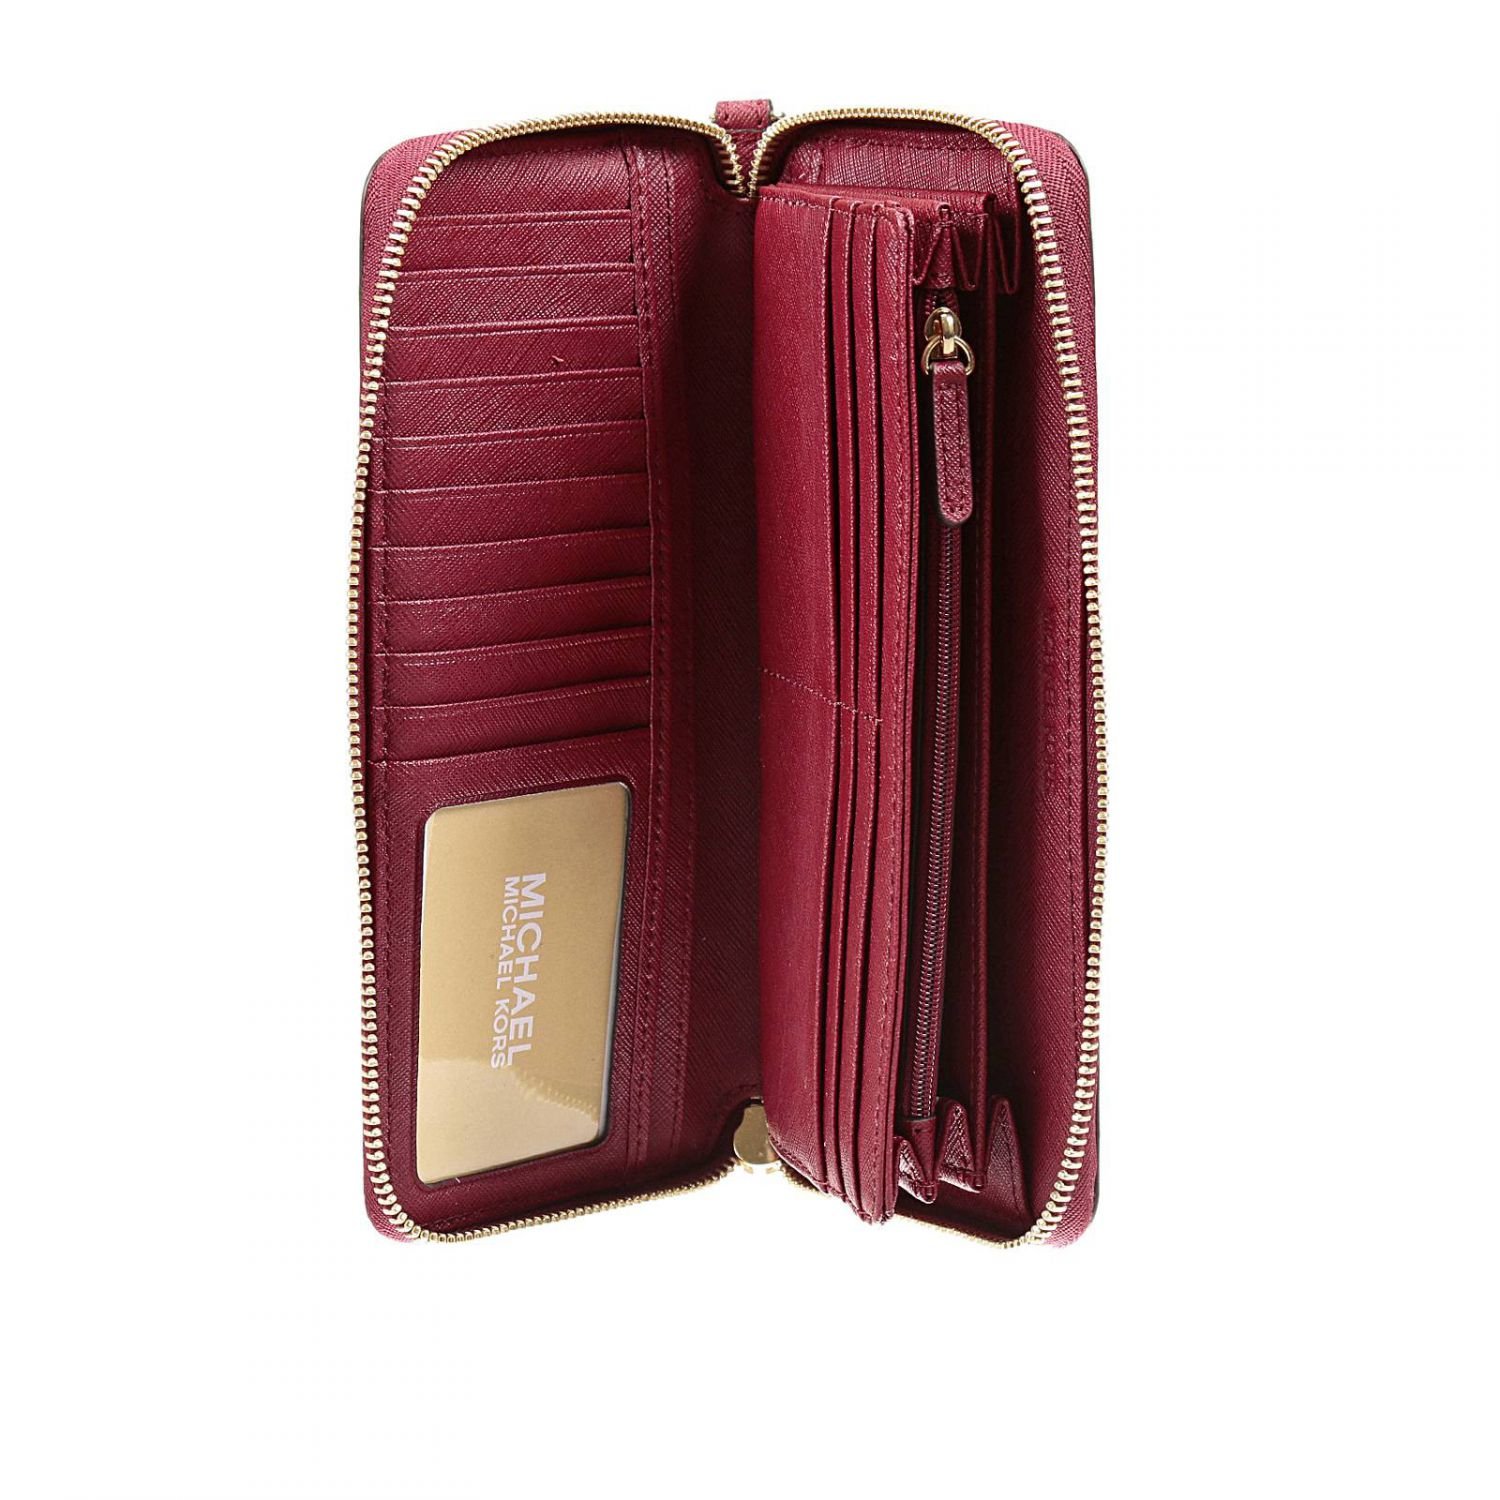 Michael Kors Women's Leather Zip Up Wallet Red Size L